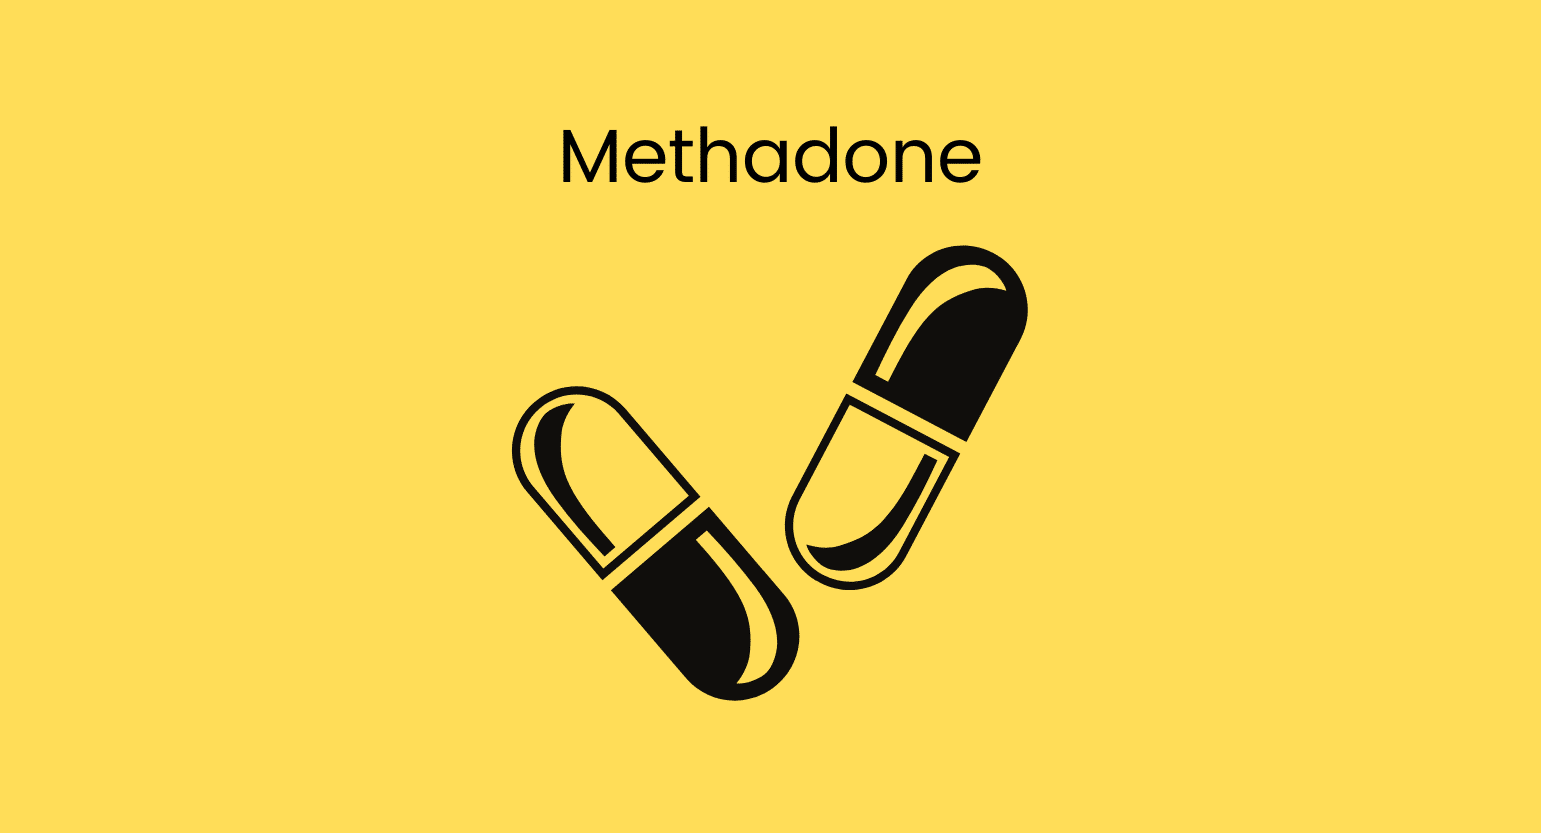 Why You Should Never Mix Kratom & Methadone